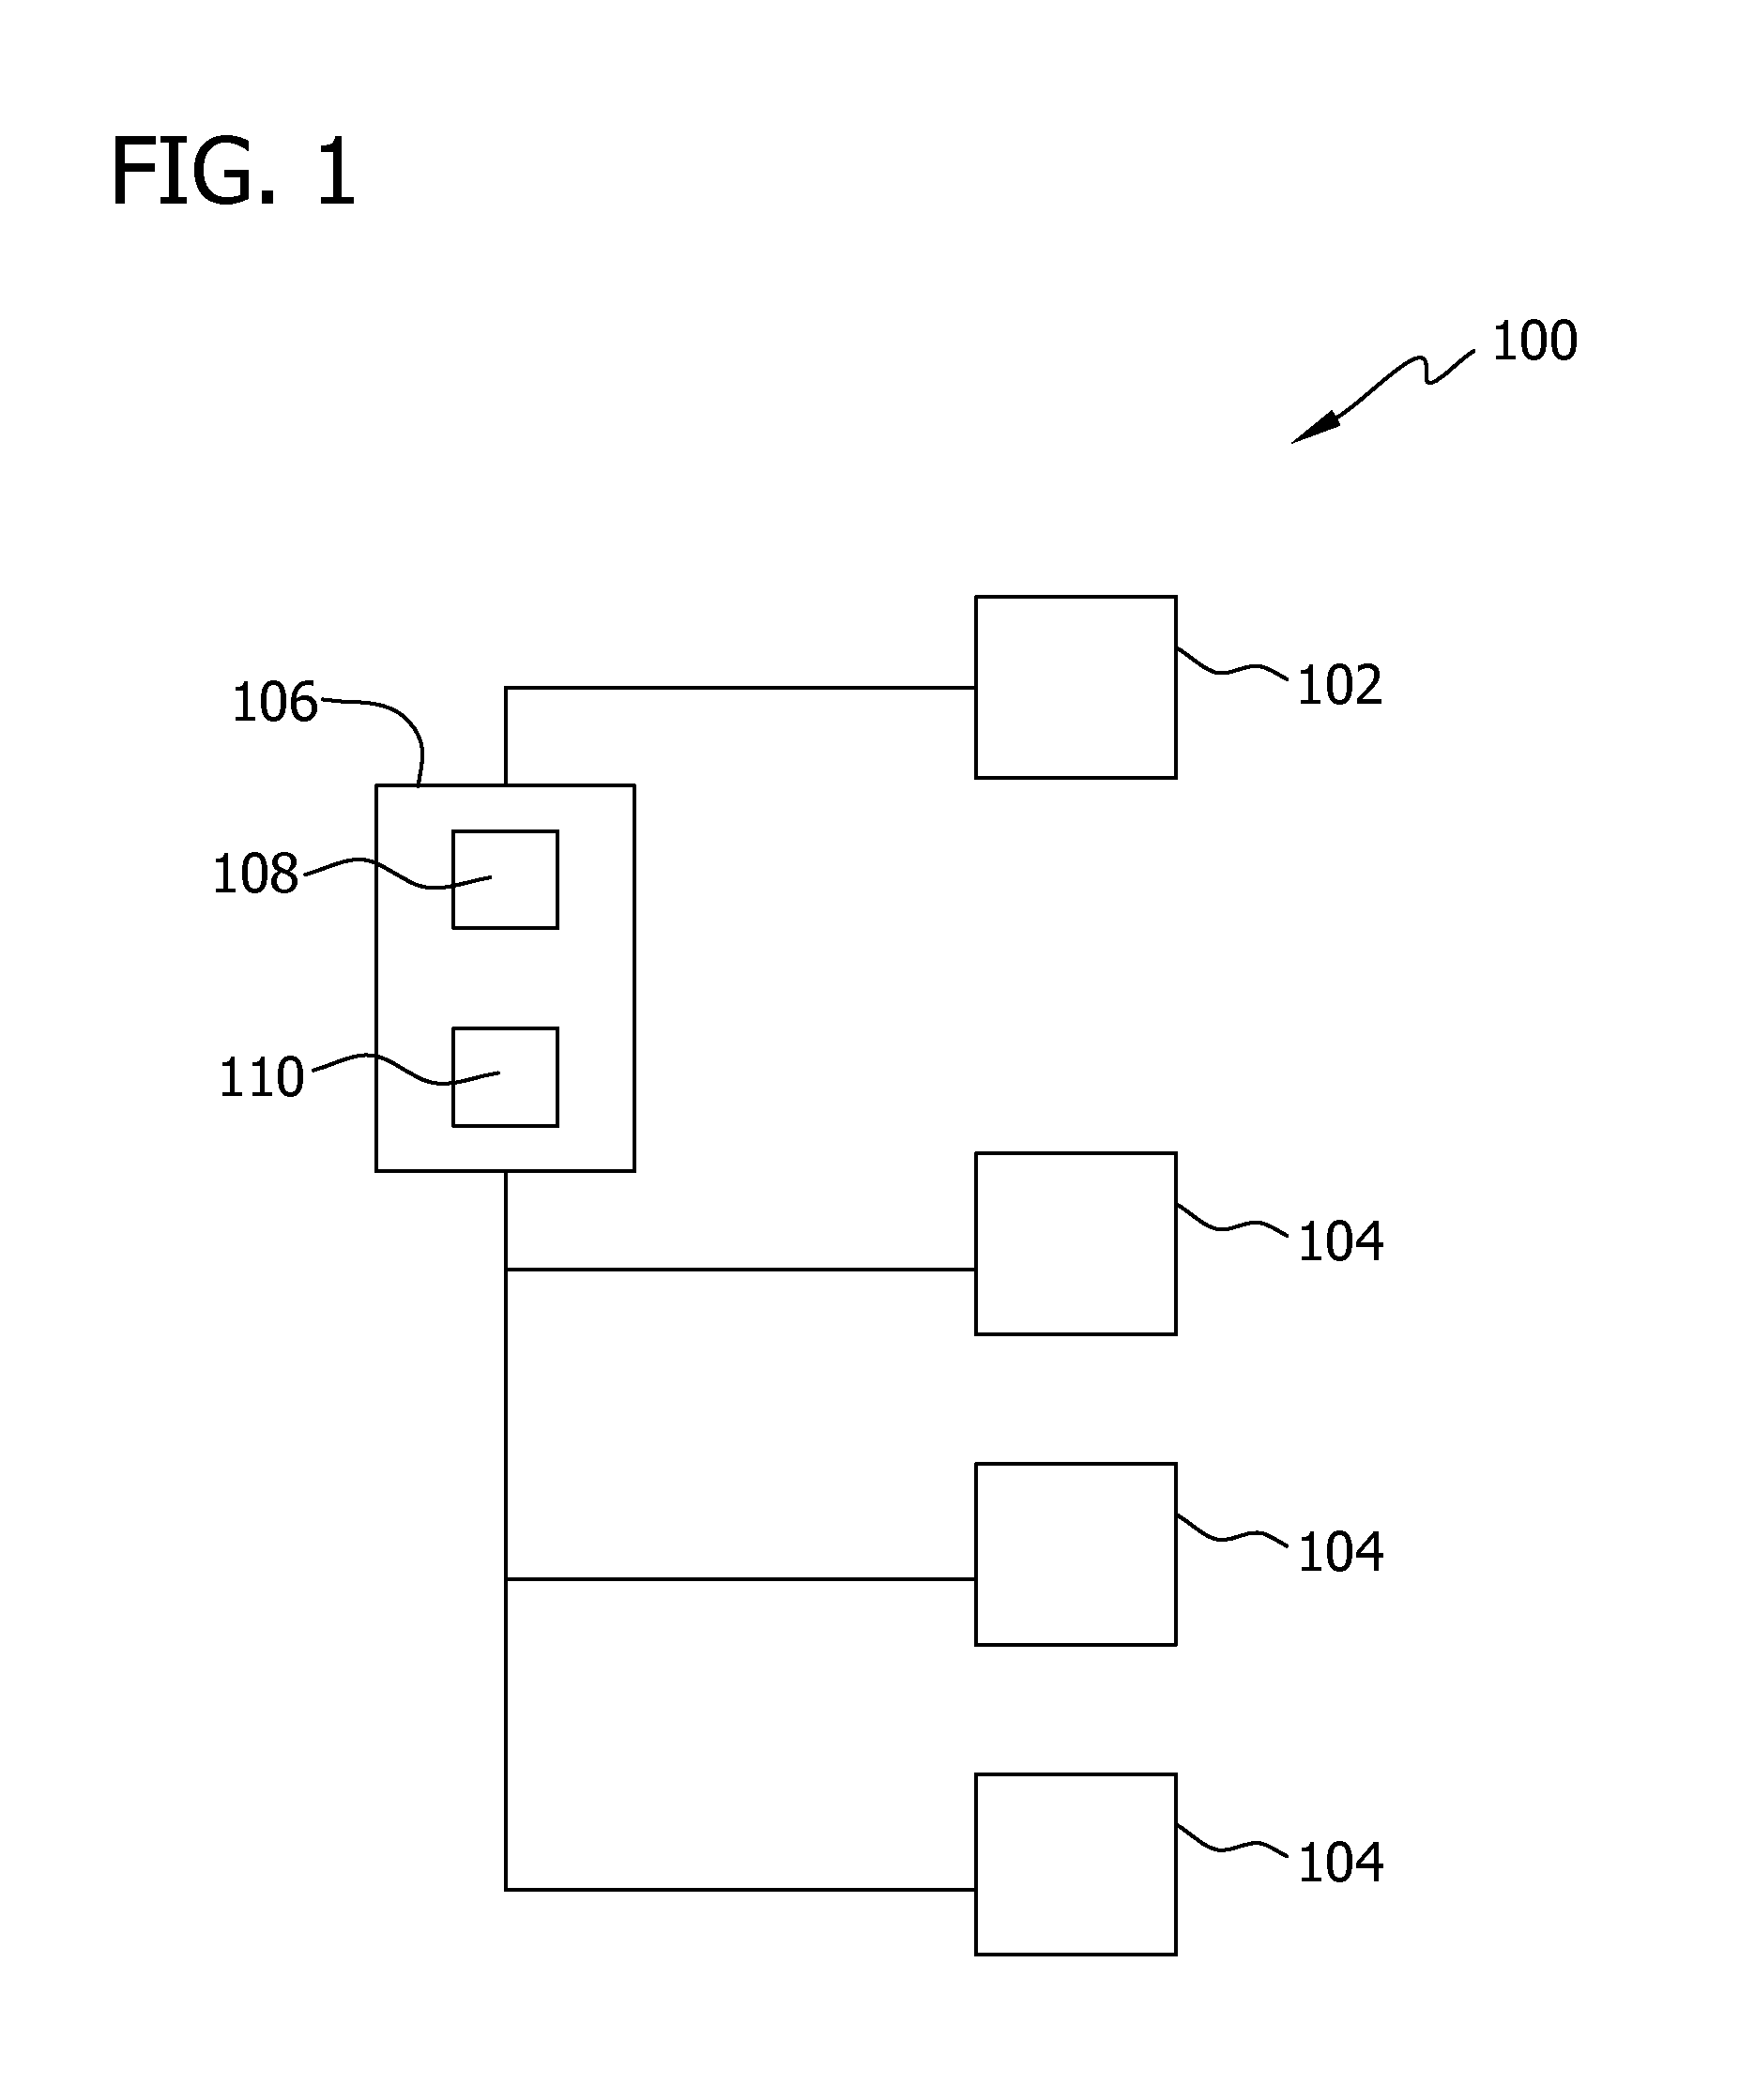 Methods, systems, and apparatus for detecting arc flash events using light and time discrimination